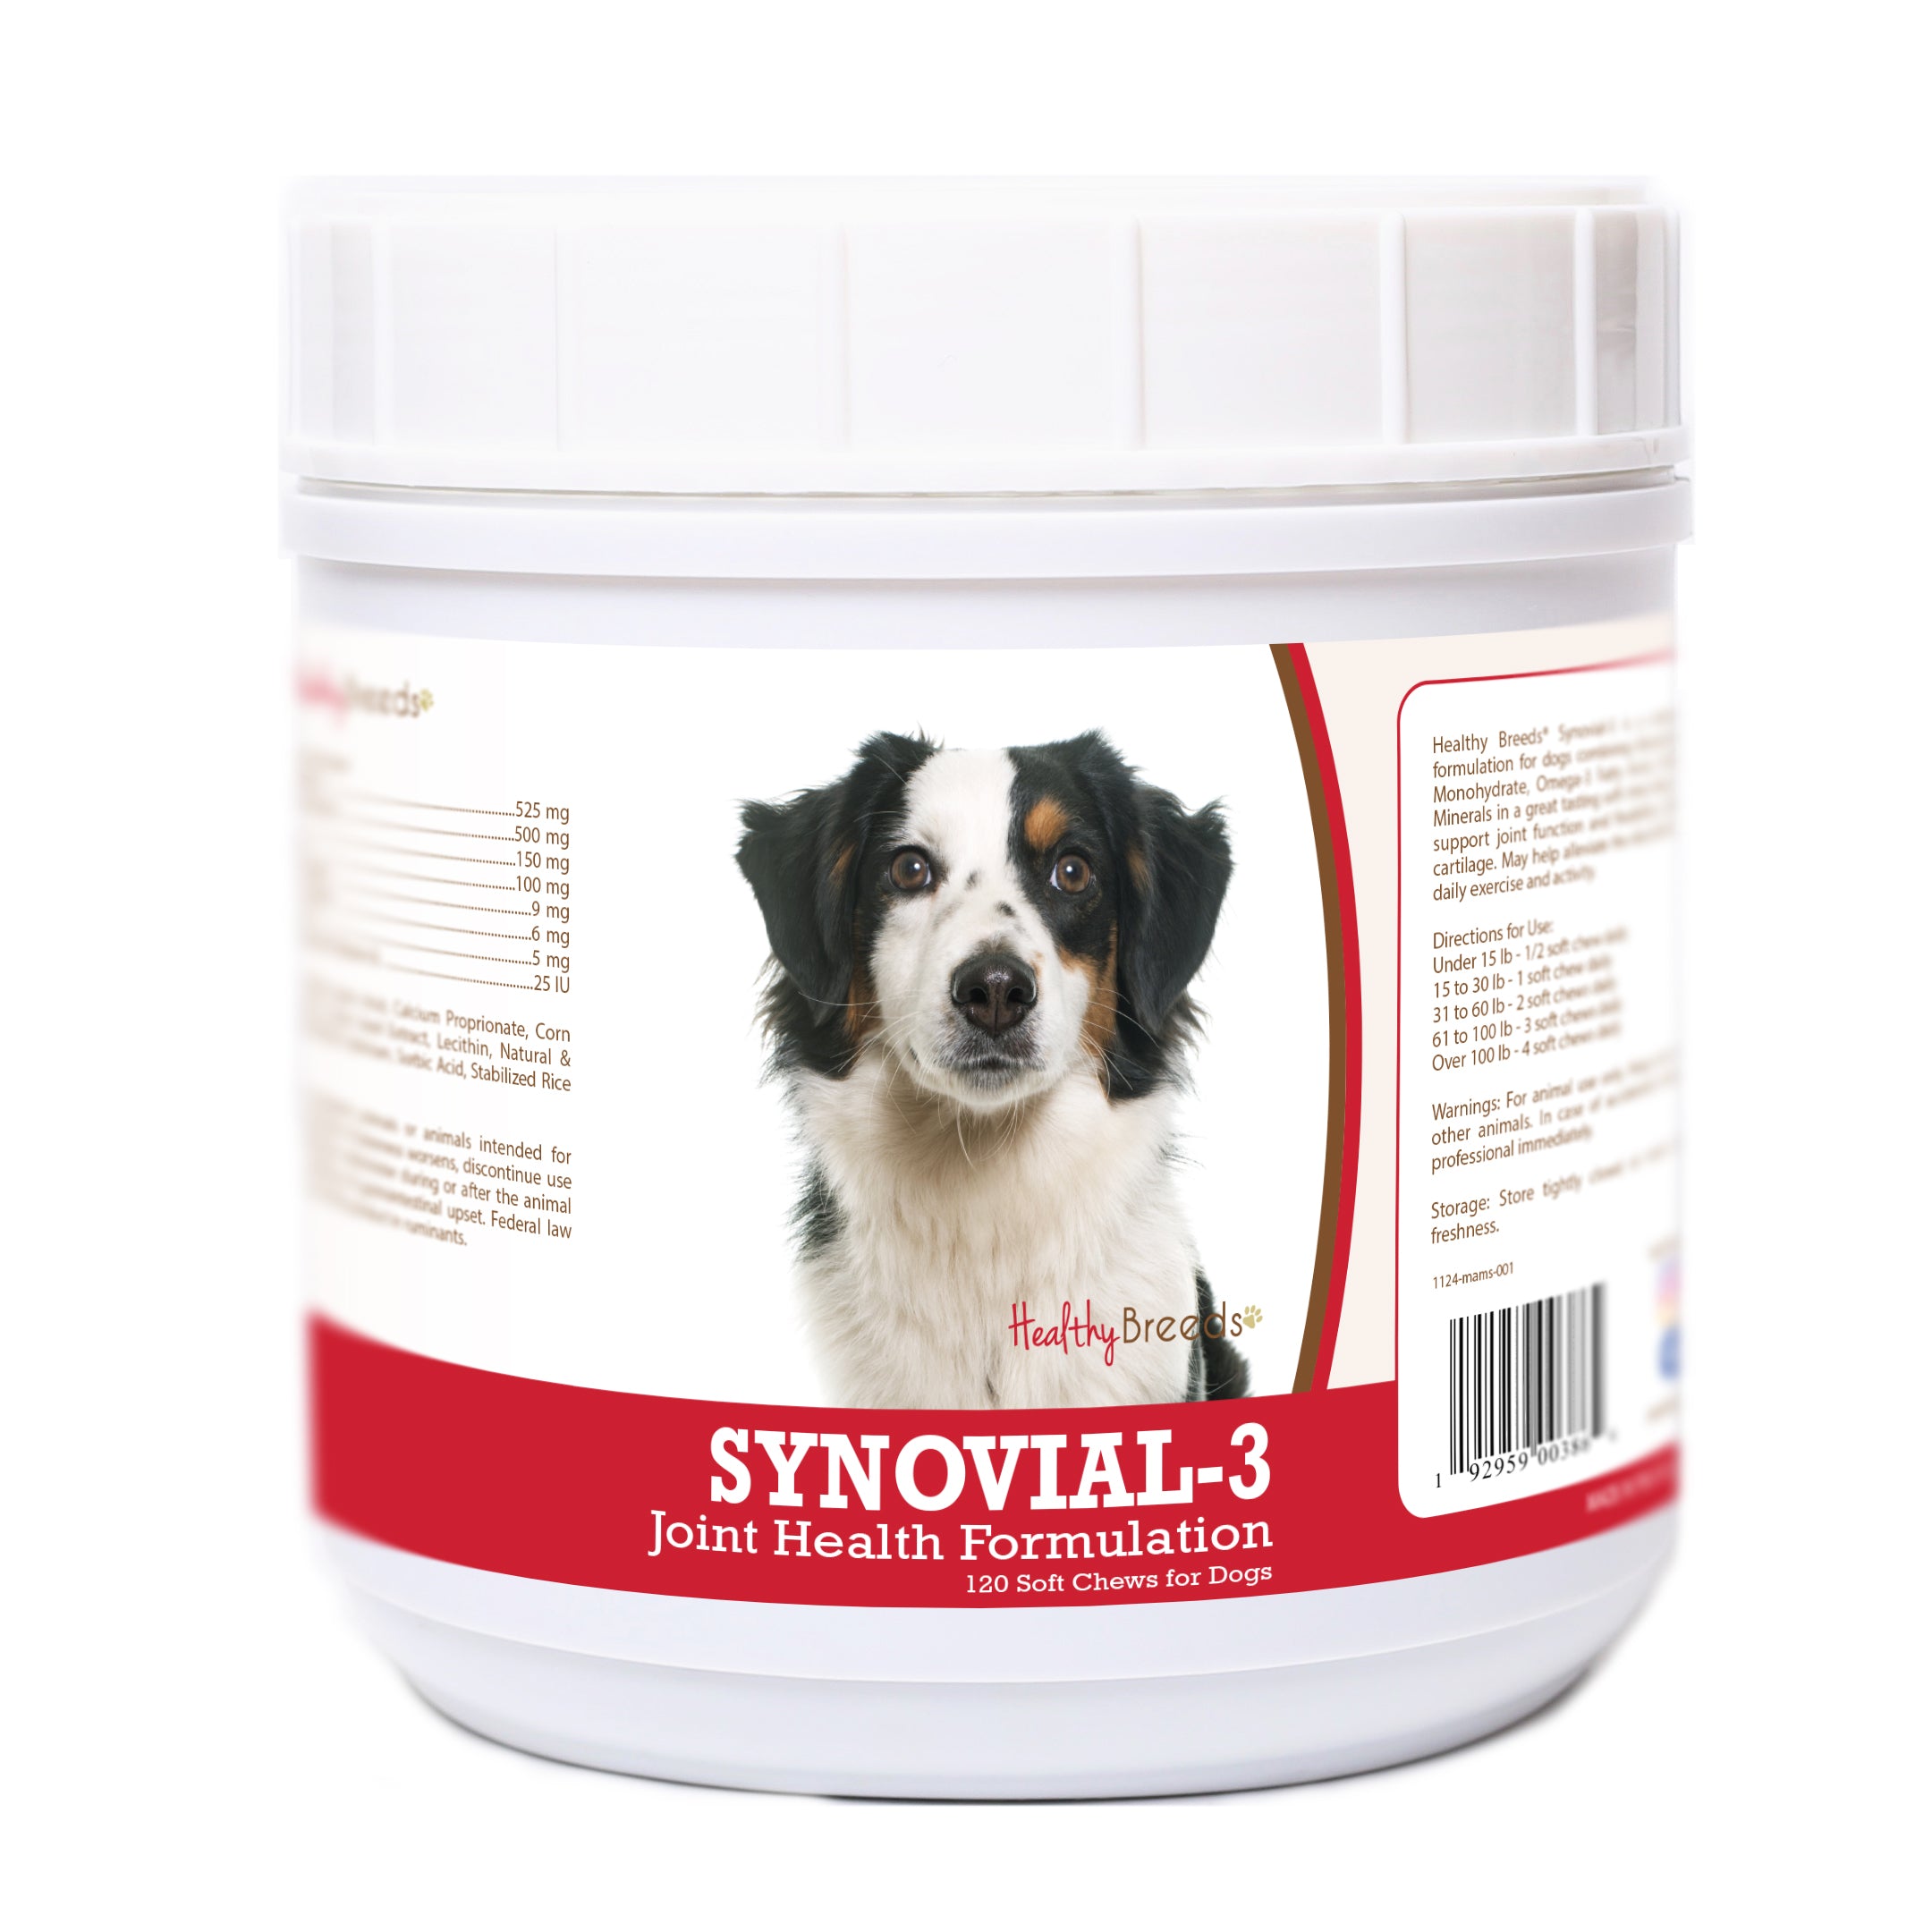 Miniature American Shepherd Synovial-3 Joint Health Formulation Soft Chews 120 Count